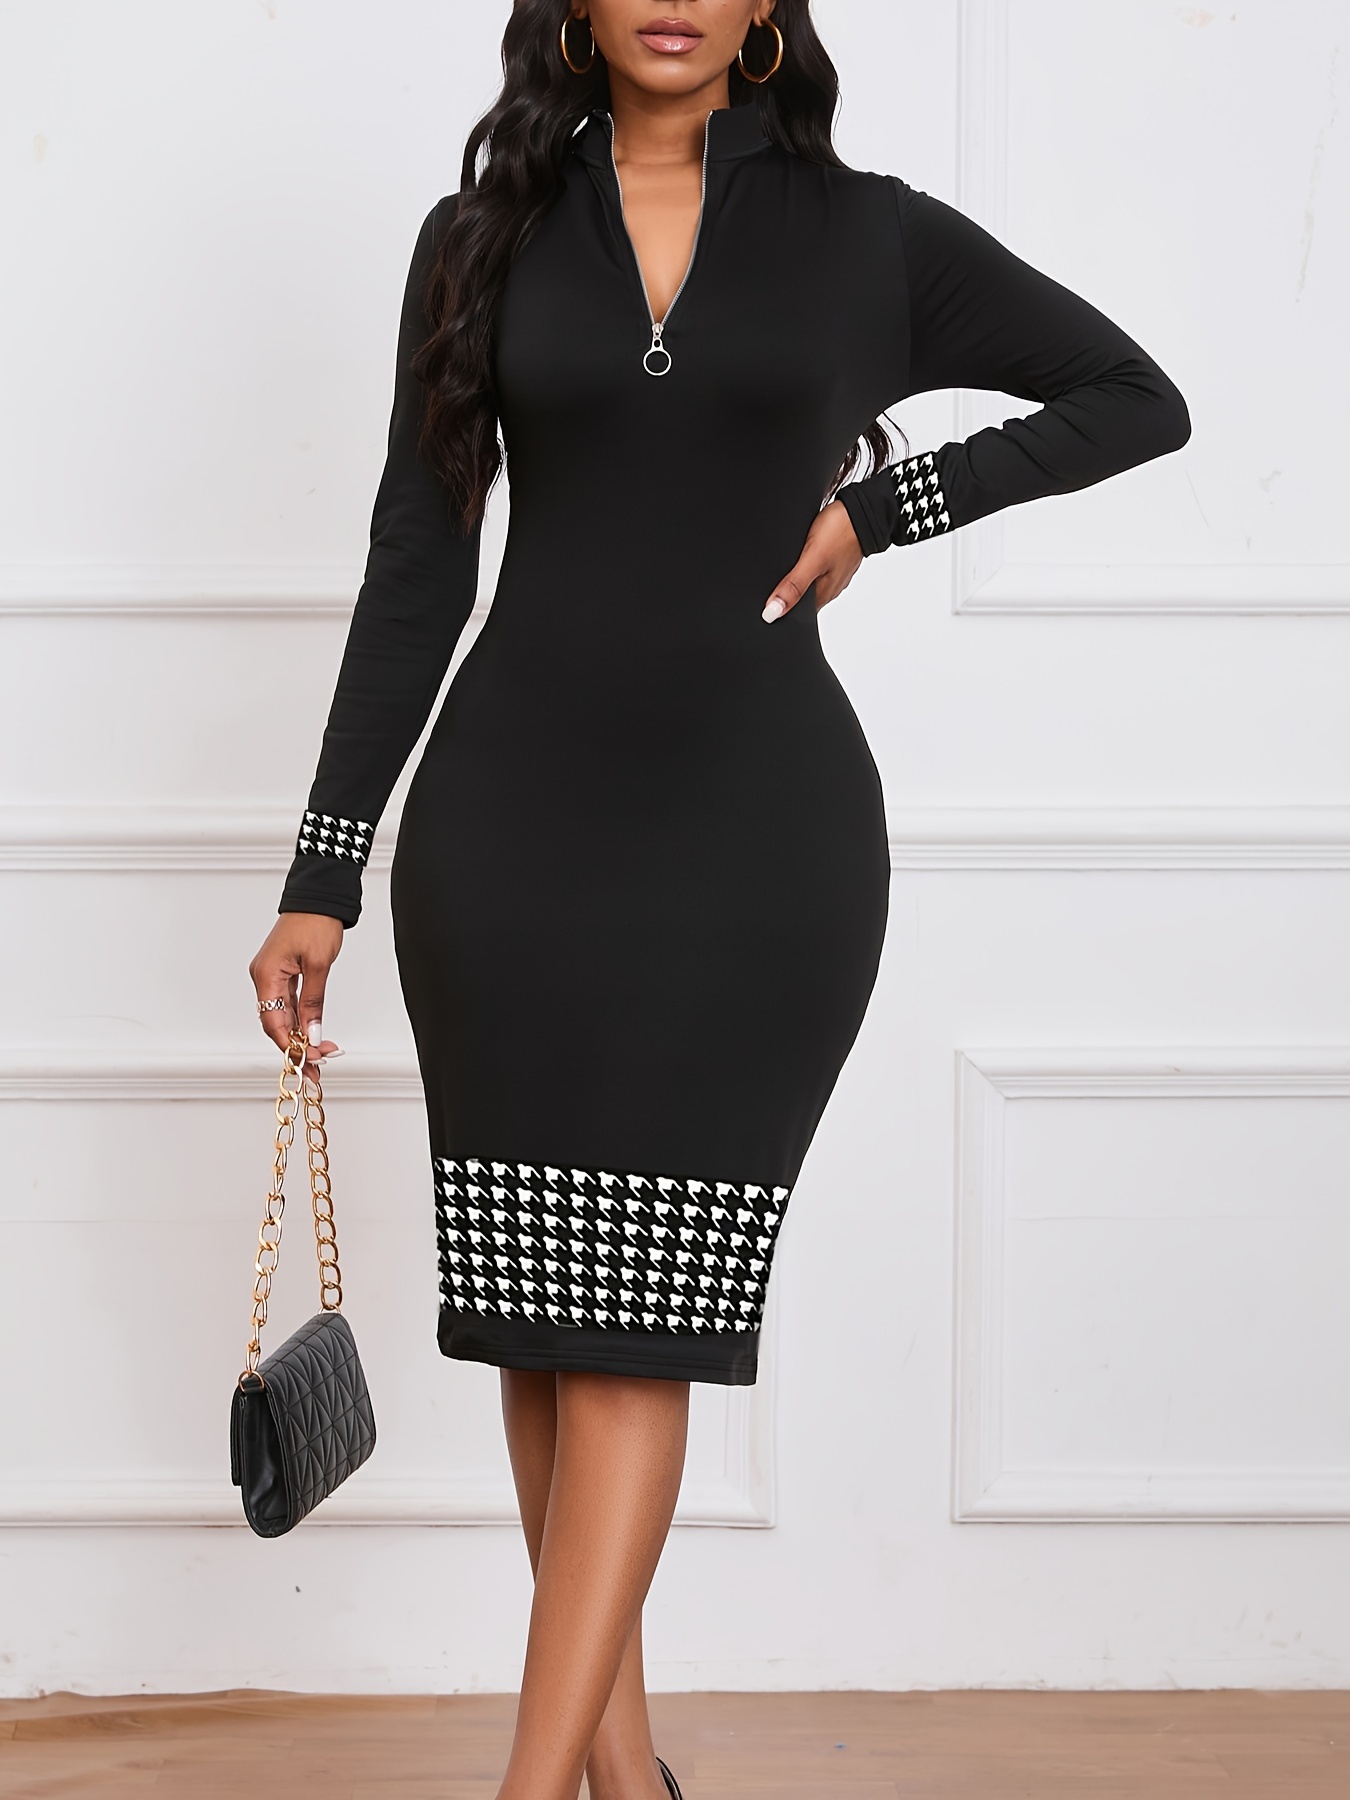 zip up striped print dress casual long sleeve bodycon midi dress womens clothing details 3